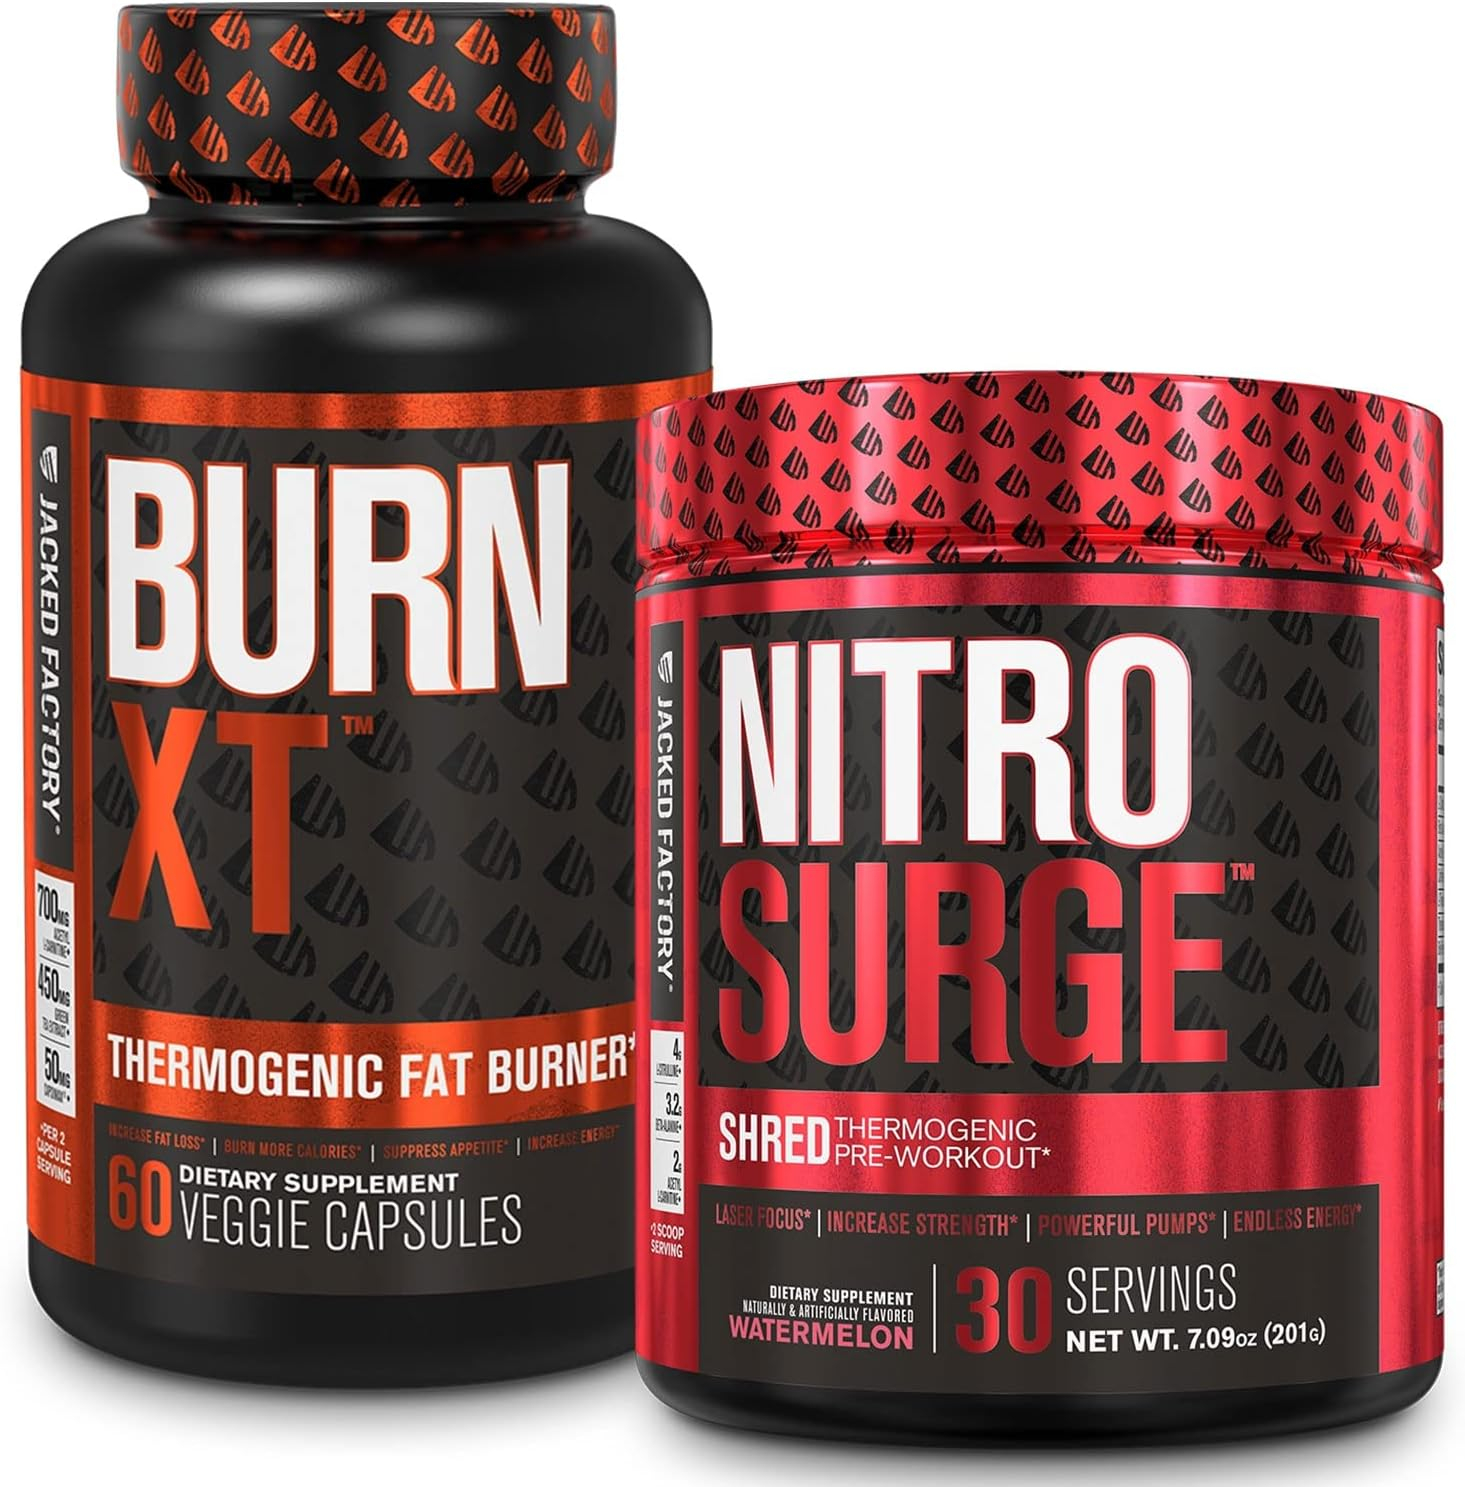 Jacked Factory Burn-XT Thermogenic Fat Burner  NITROSURGE Shred Thermogenic Pre-Workout in Watermelon for Men  Women